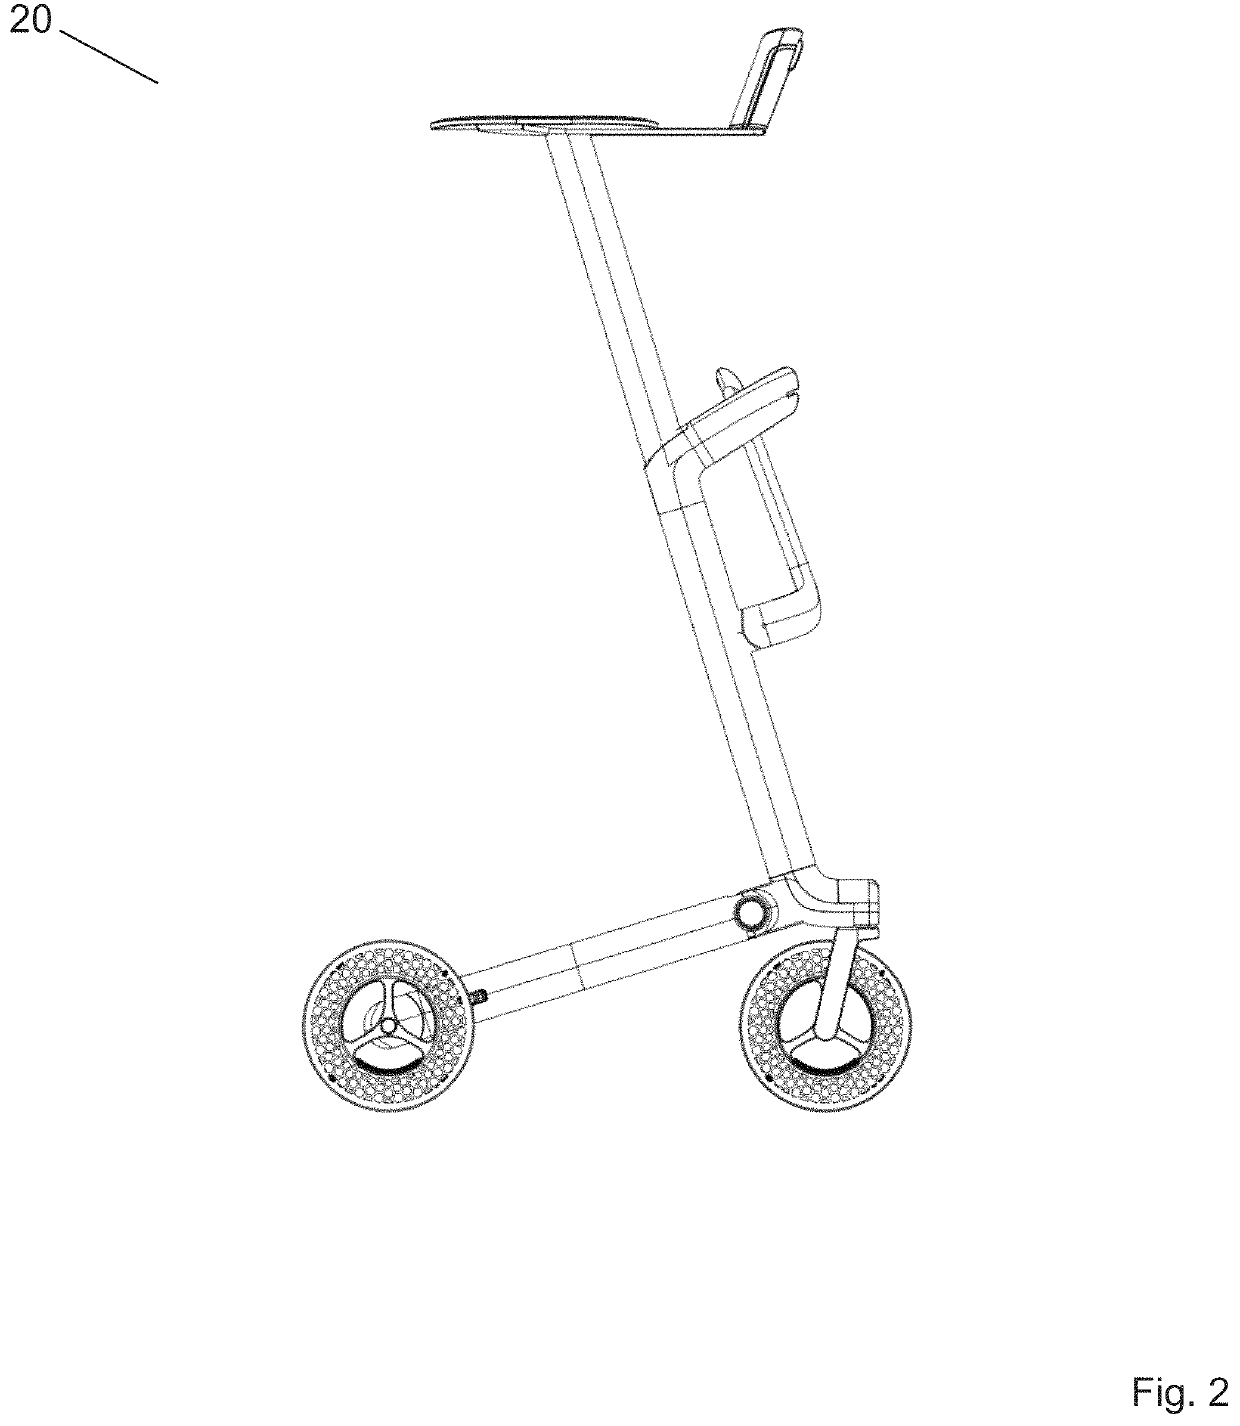 Mobility assistance apparatus